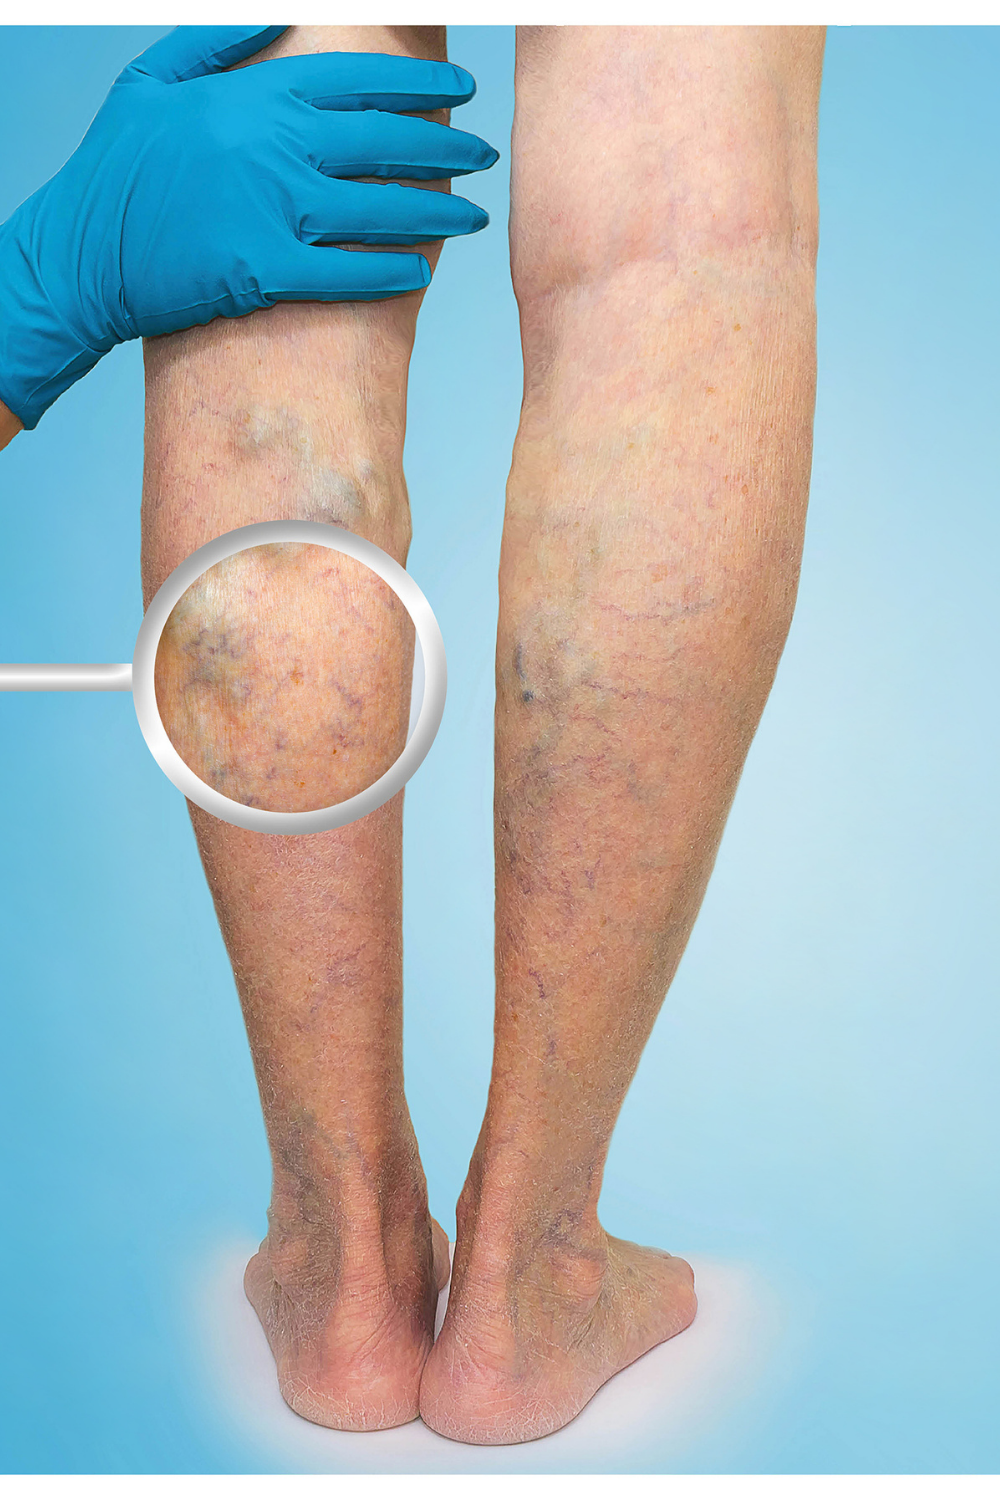 Varicose Veins: All You Need to Know